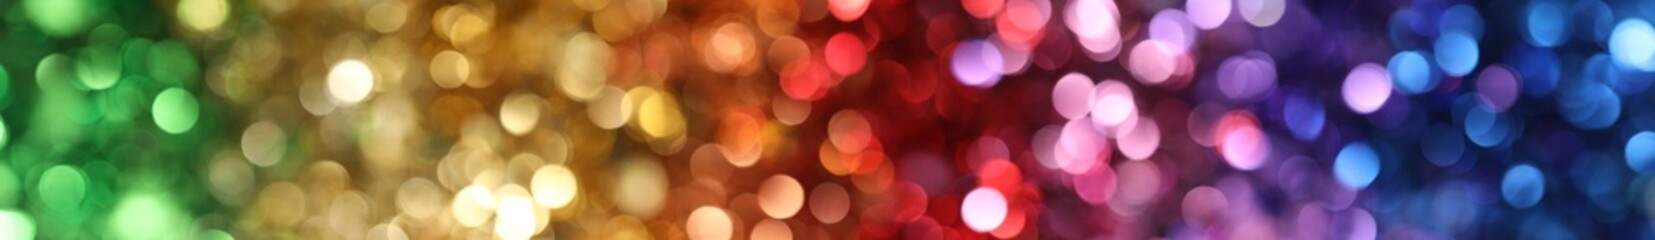 Abstract rainbow color background with a bokeh of lights in a colorful gradient.